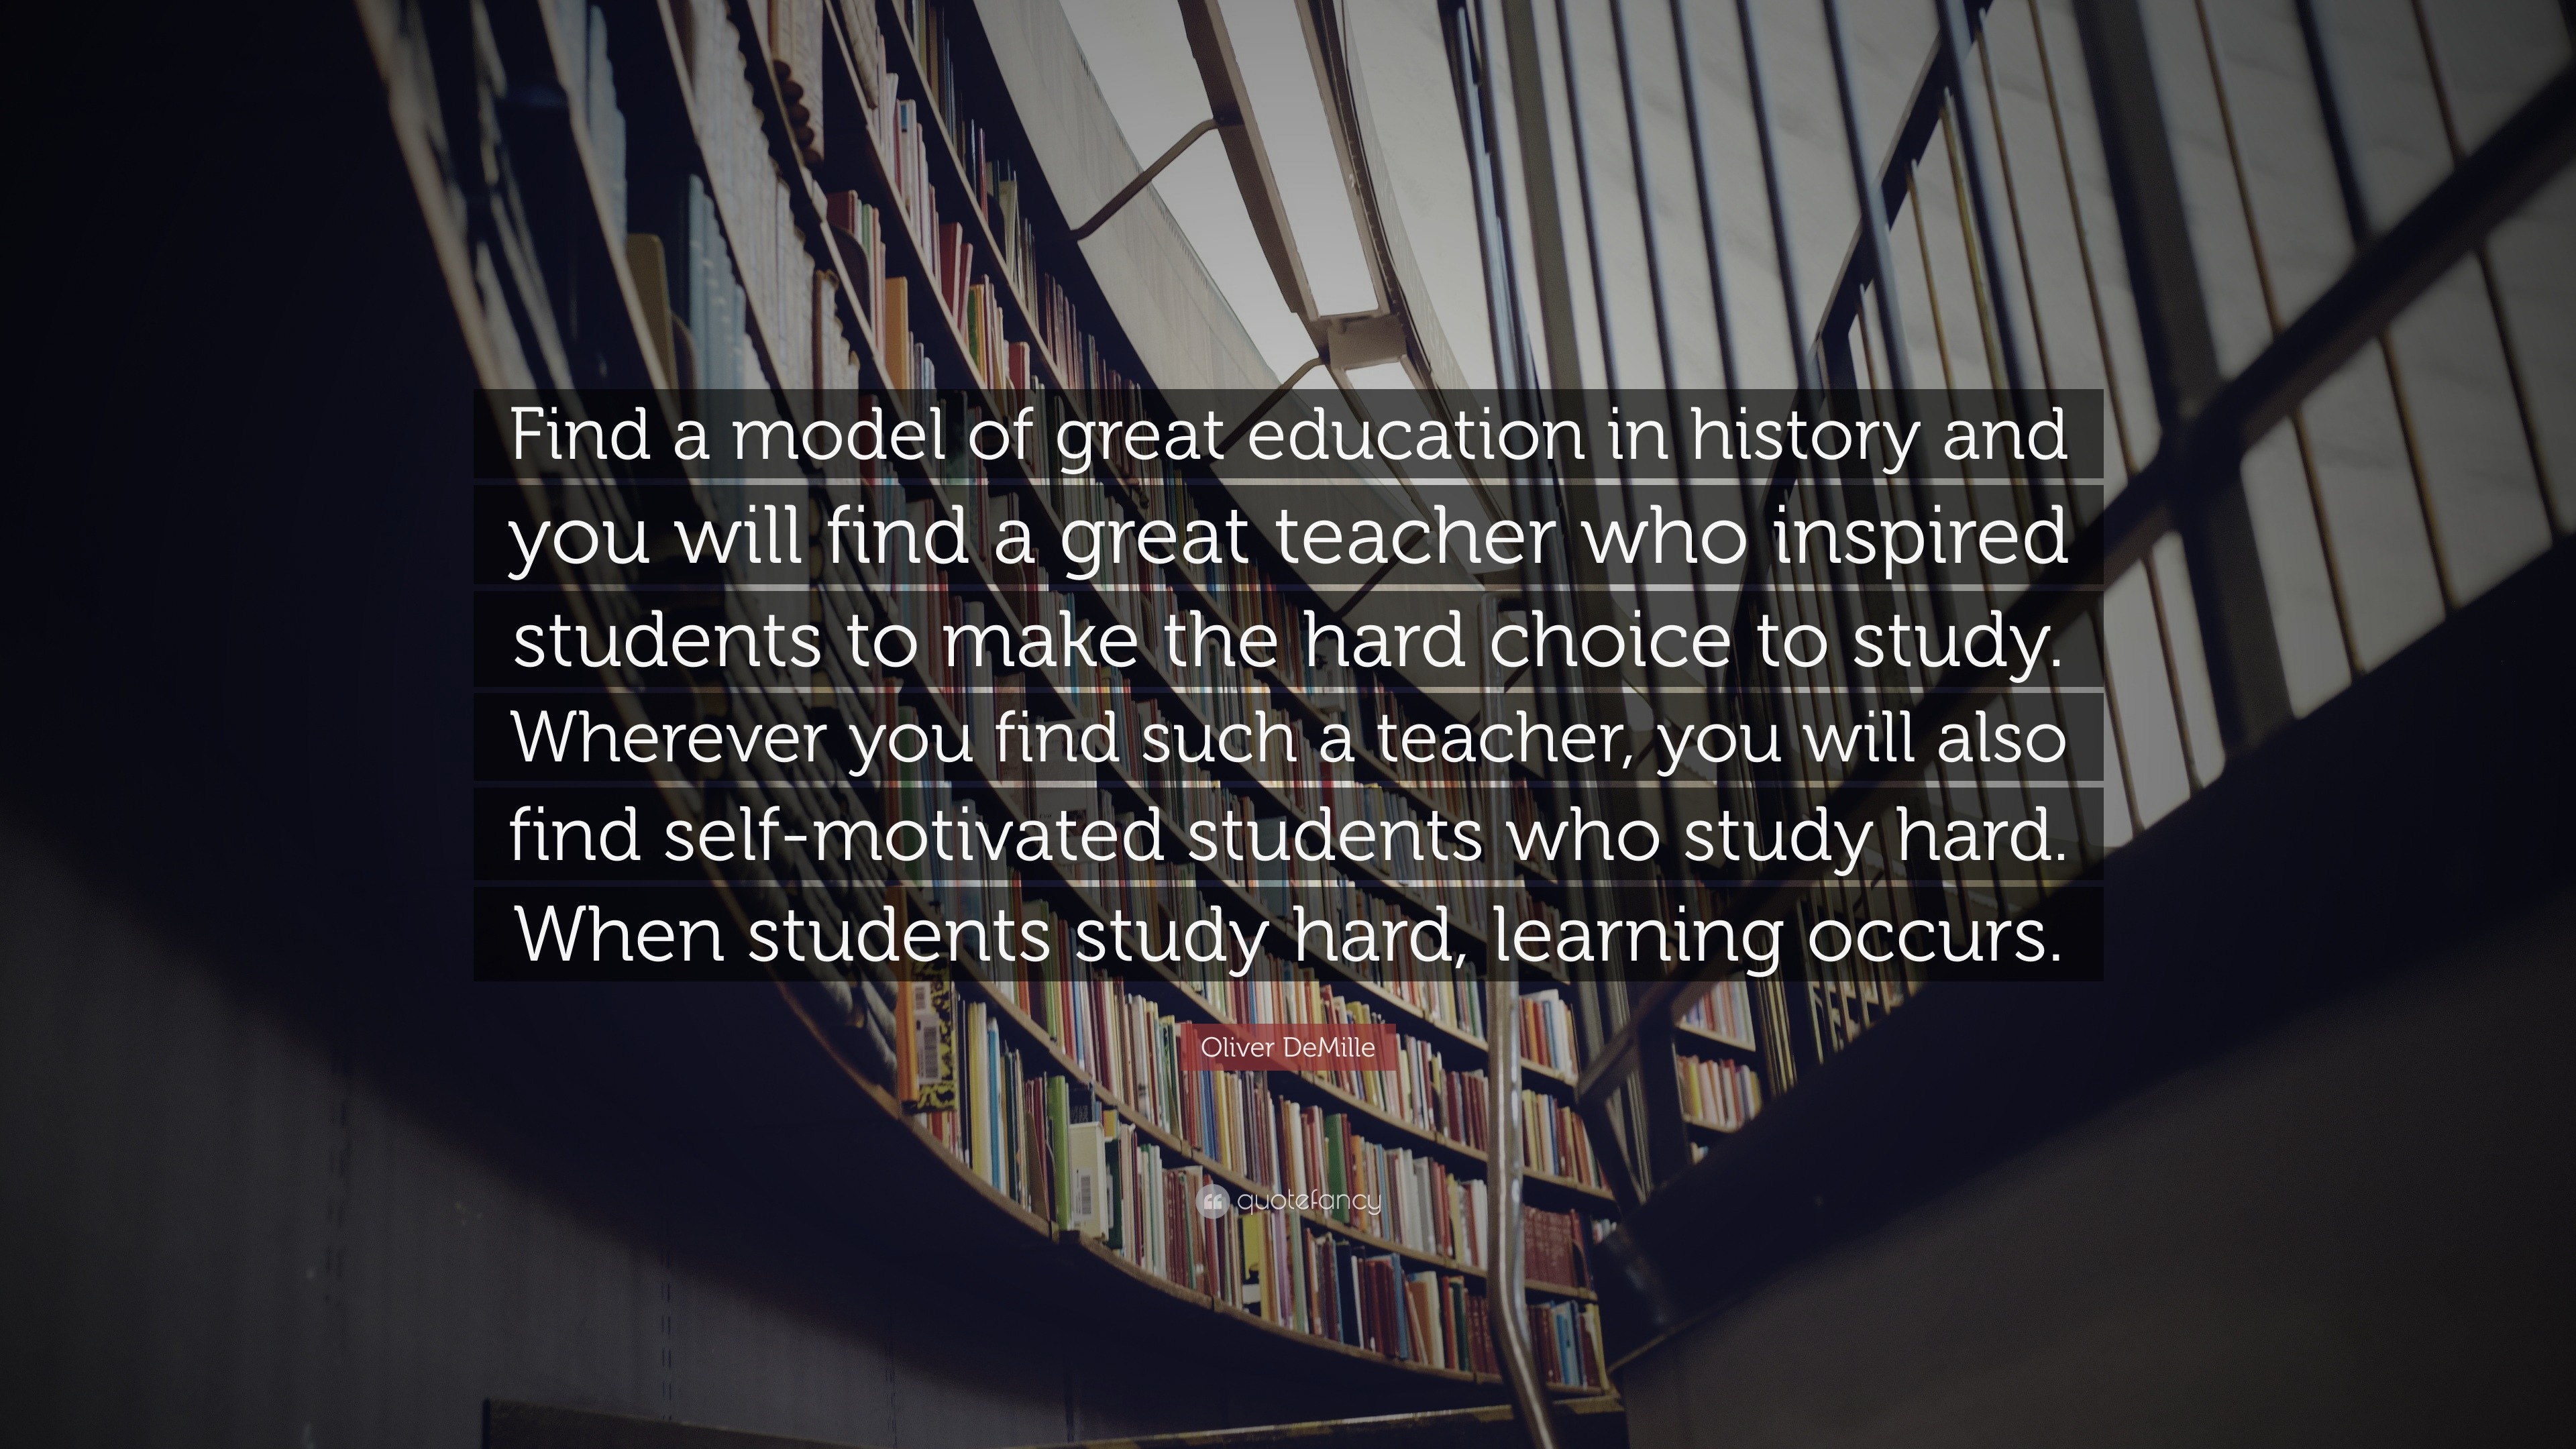 Oliver DeMille Quote: “Find a model of great education in history and you  will find a great teacher who inspired students to make the hard choi...”